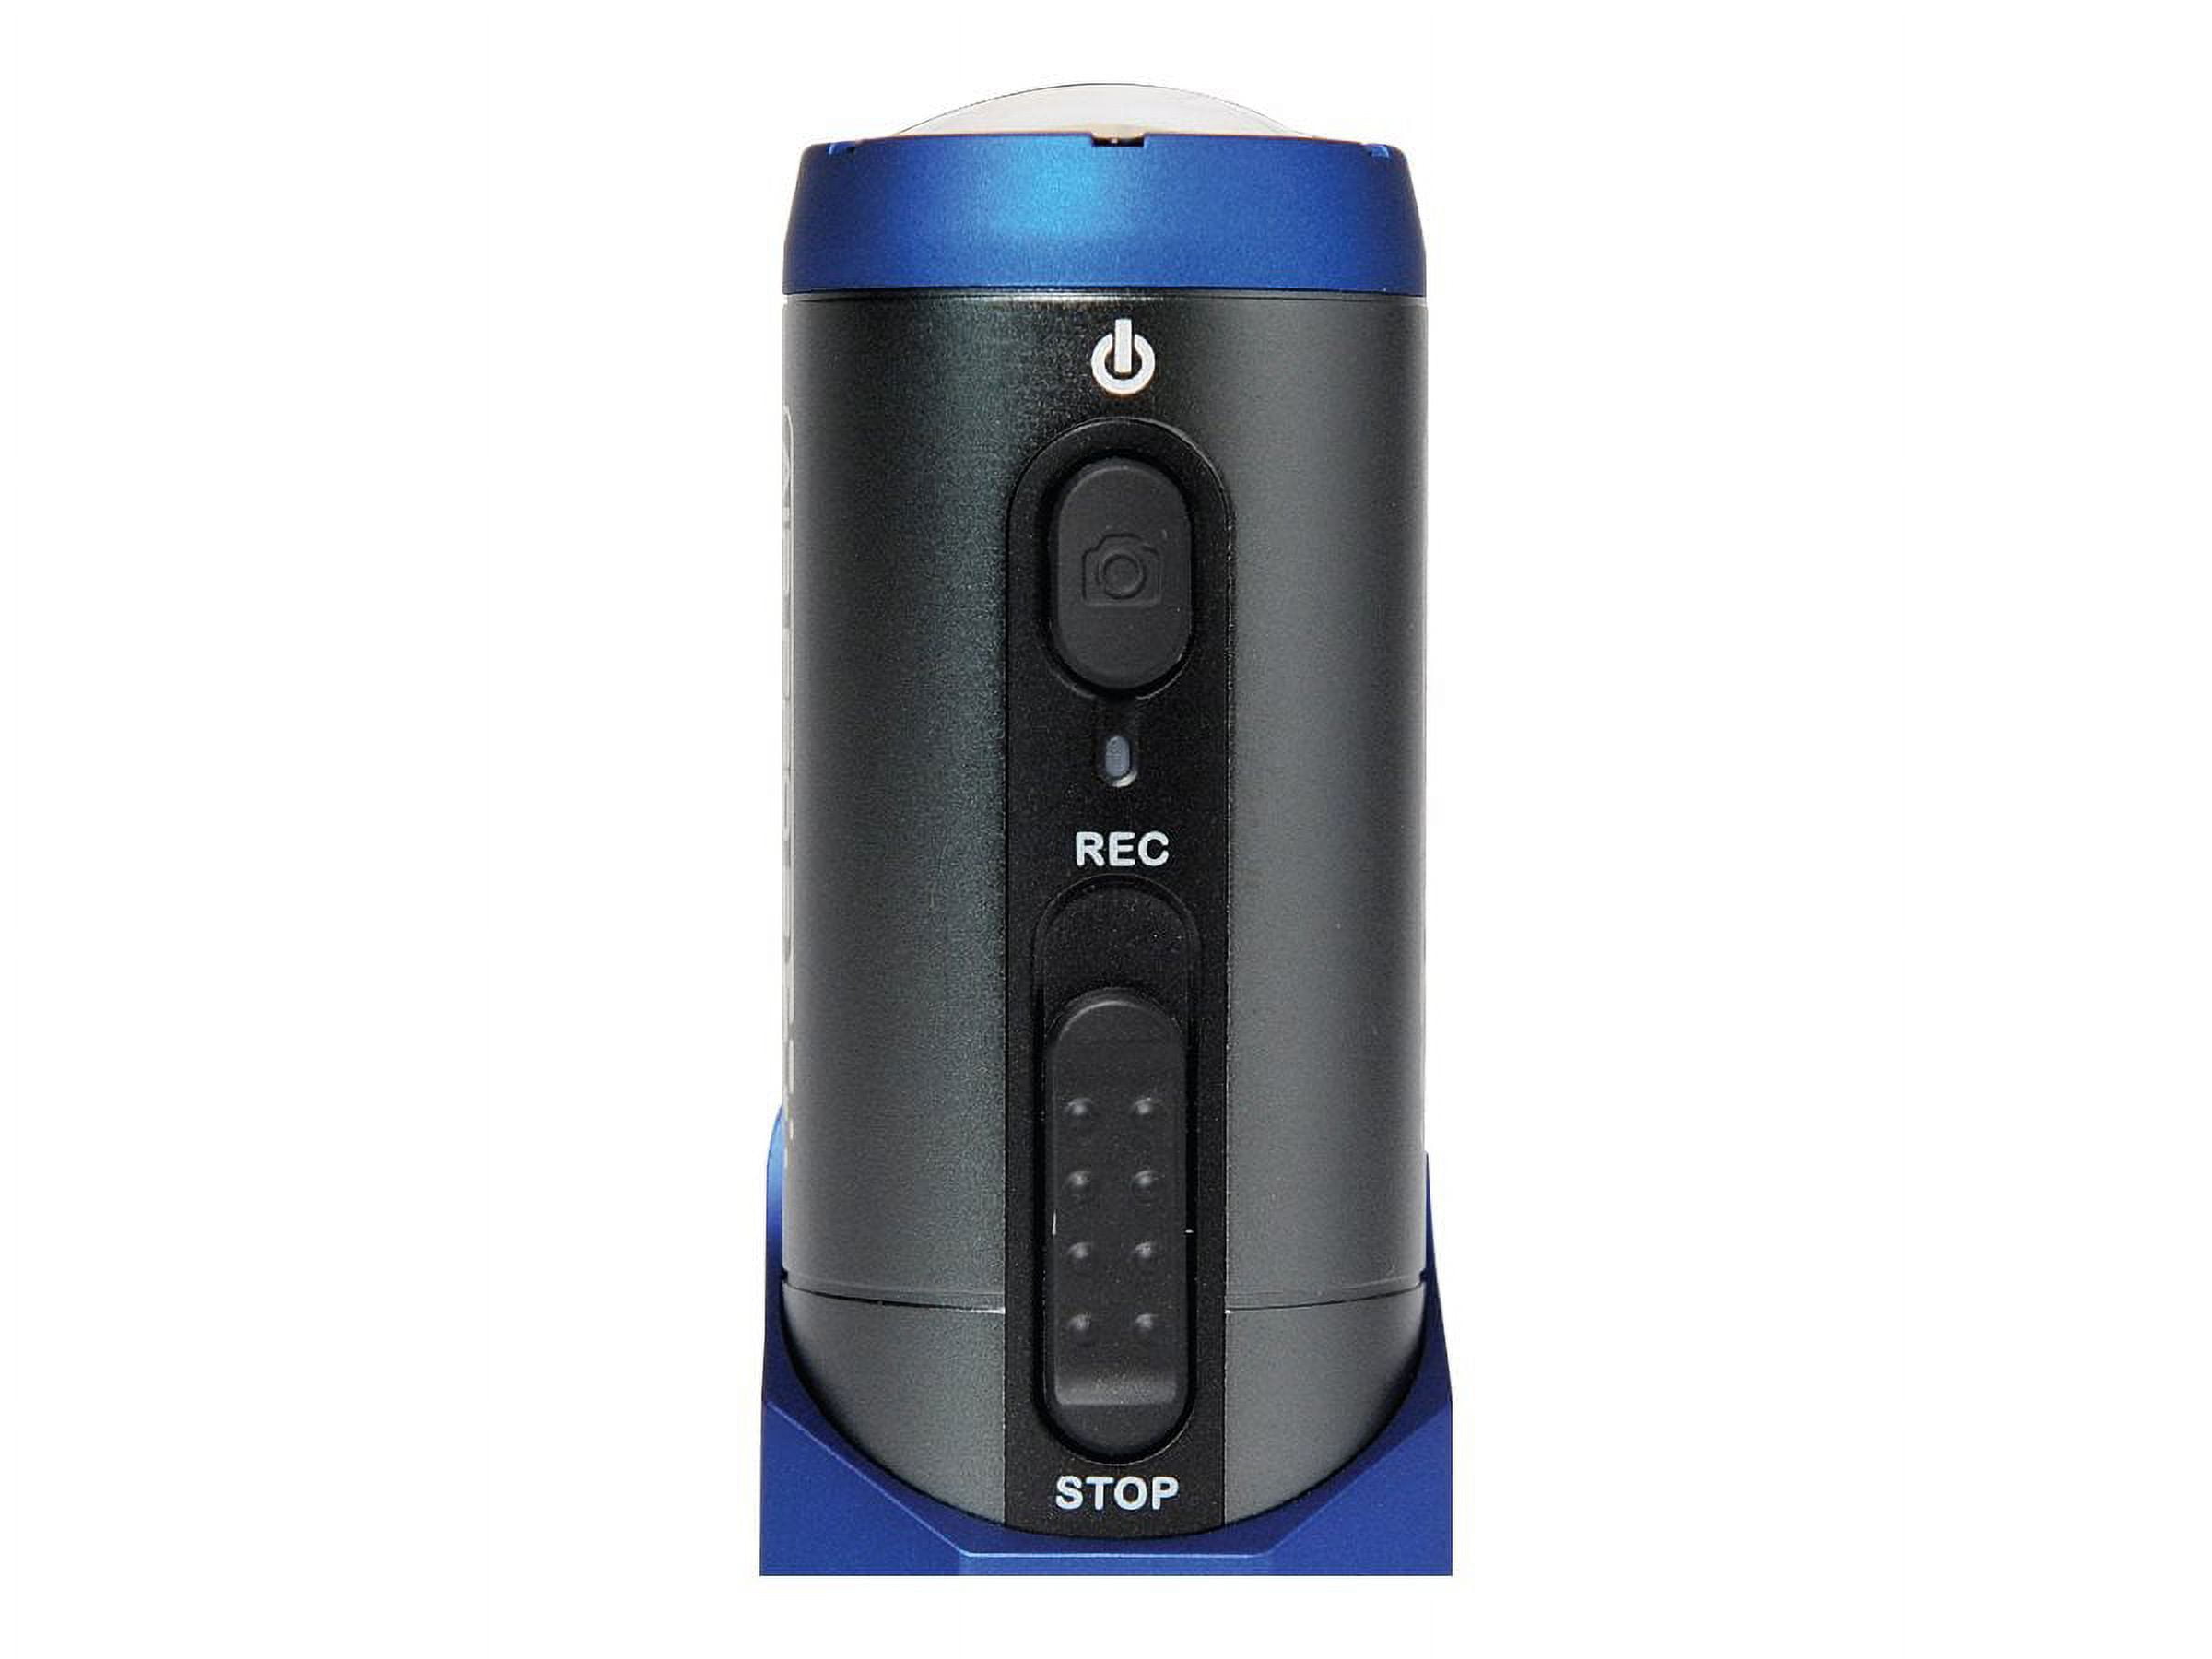 iON Air Pro Wi-Fi Lite - Action camera - 1080p - Wi-Fi